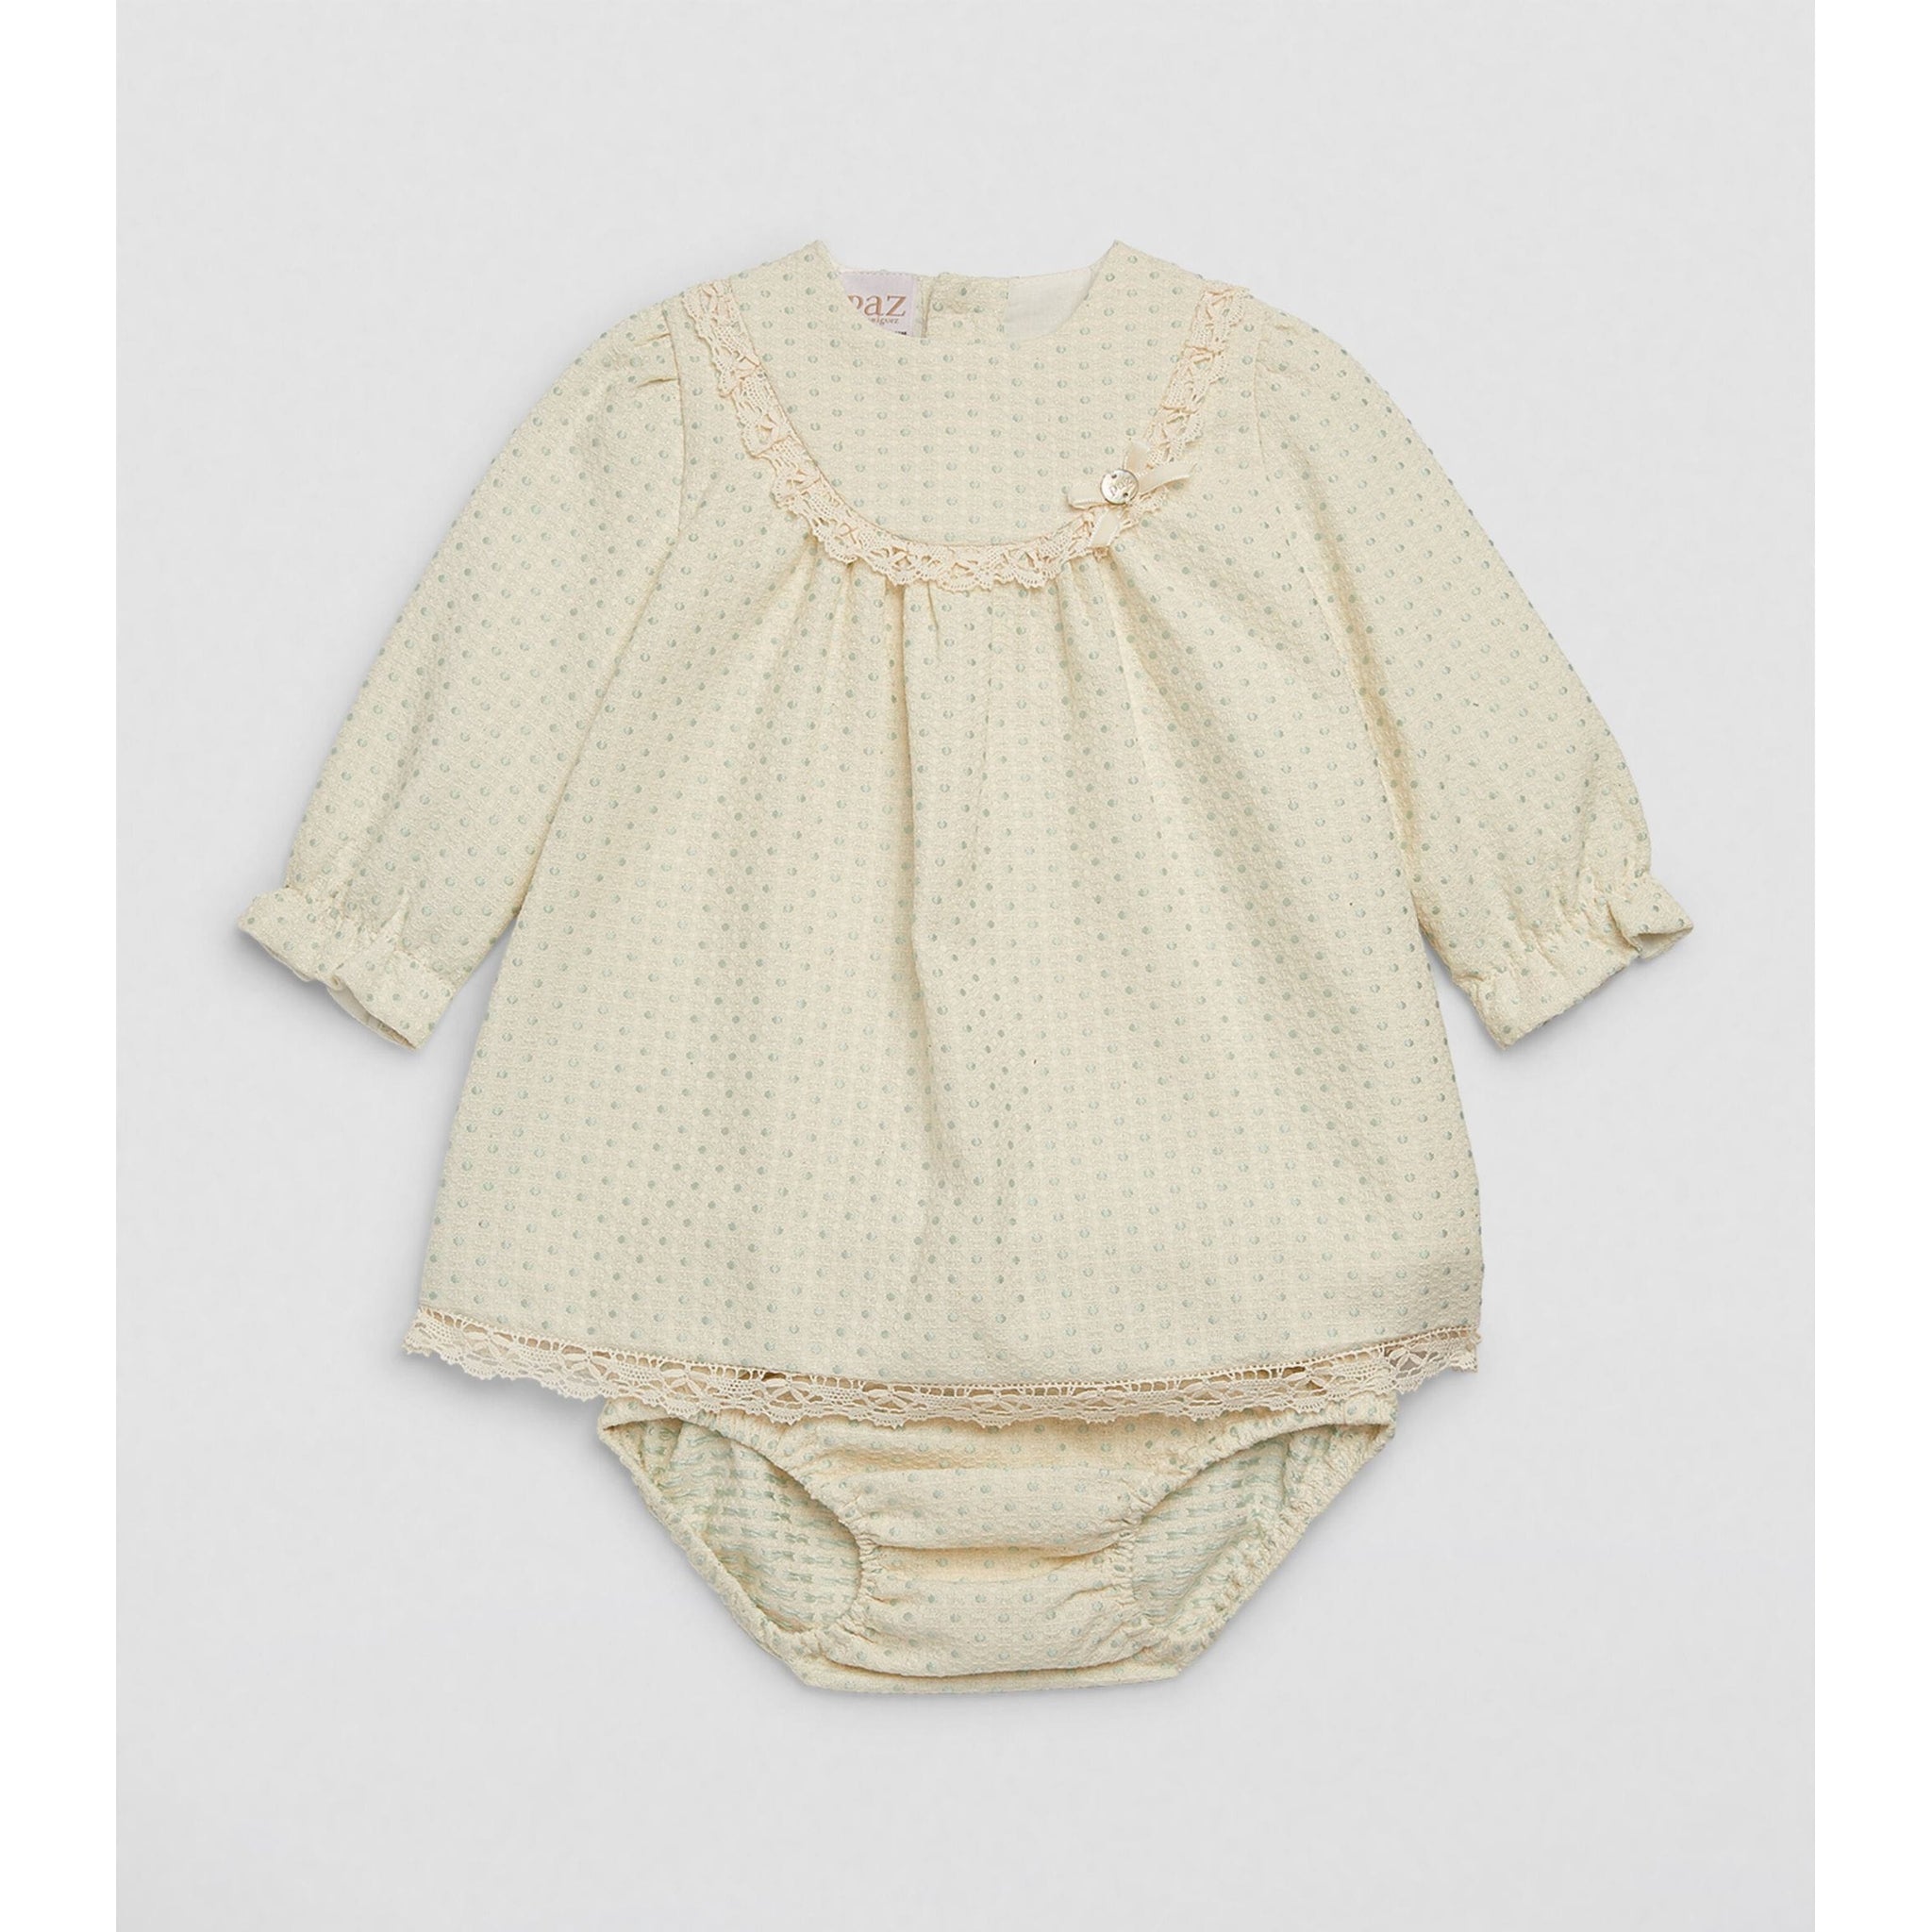 Paz Rodriguez Dresses Paz Rodriguez Baby Girls Woven Dress and Bloomers Set